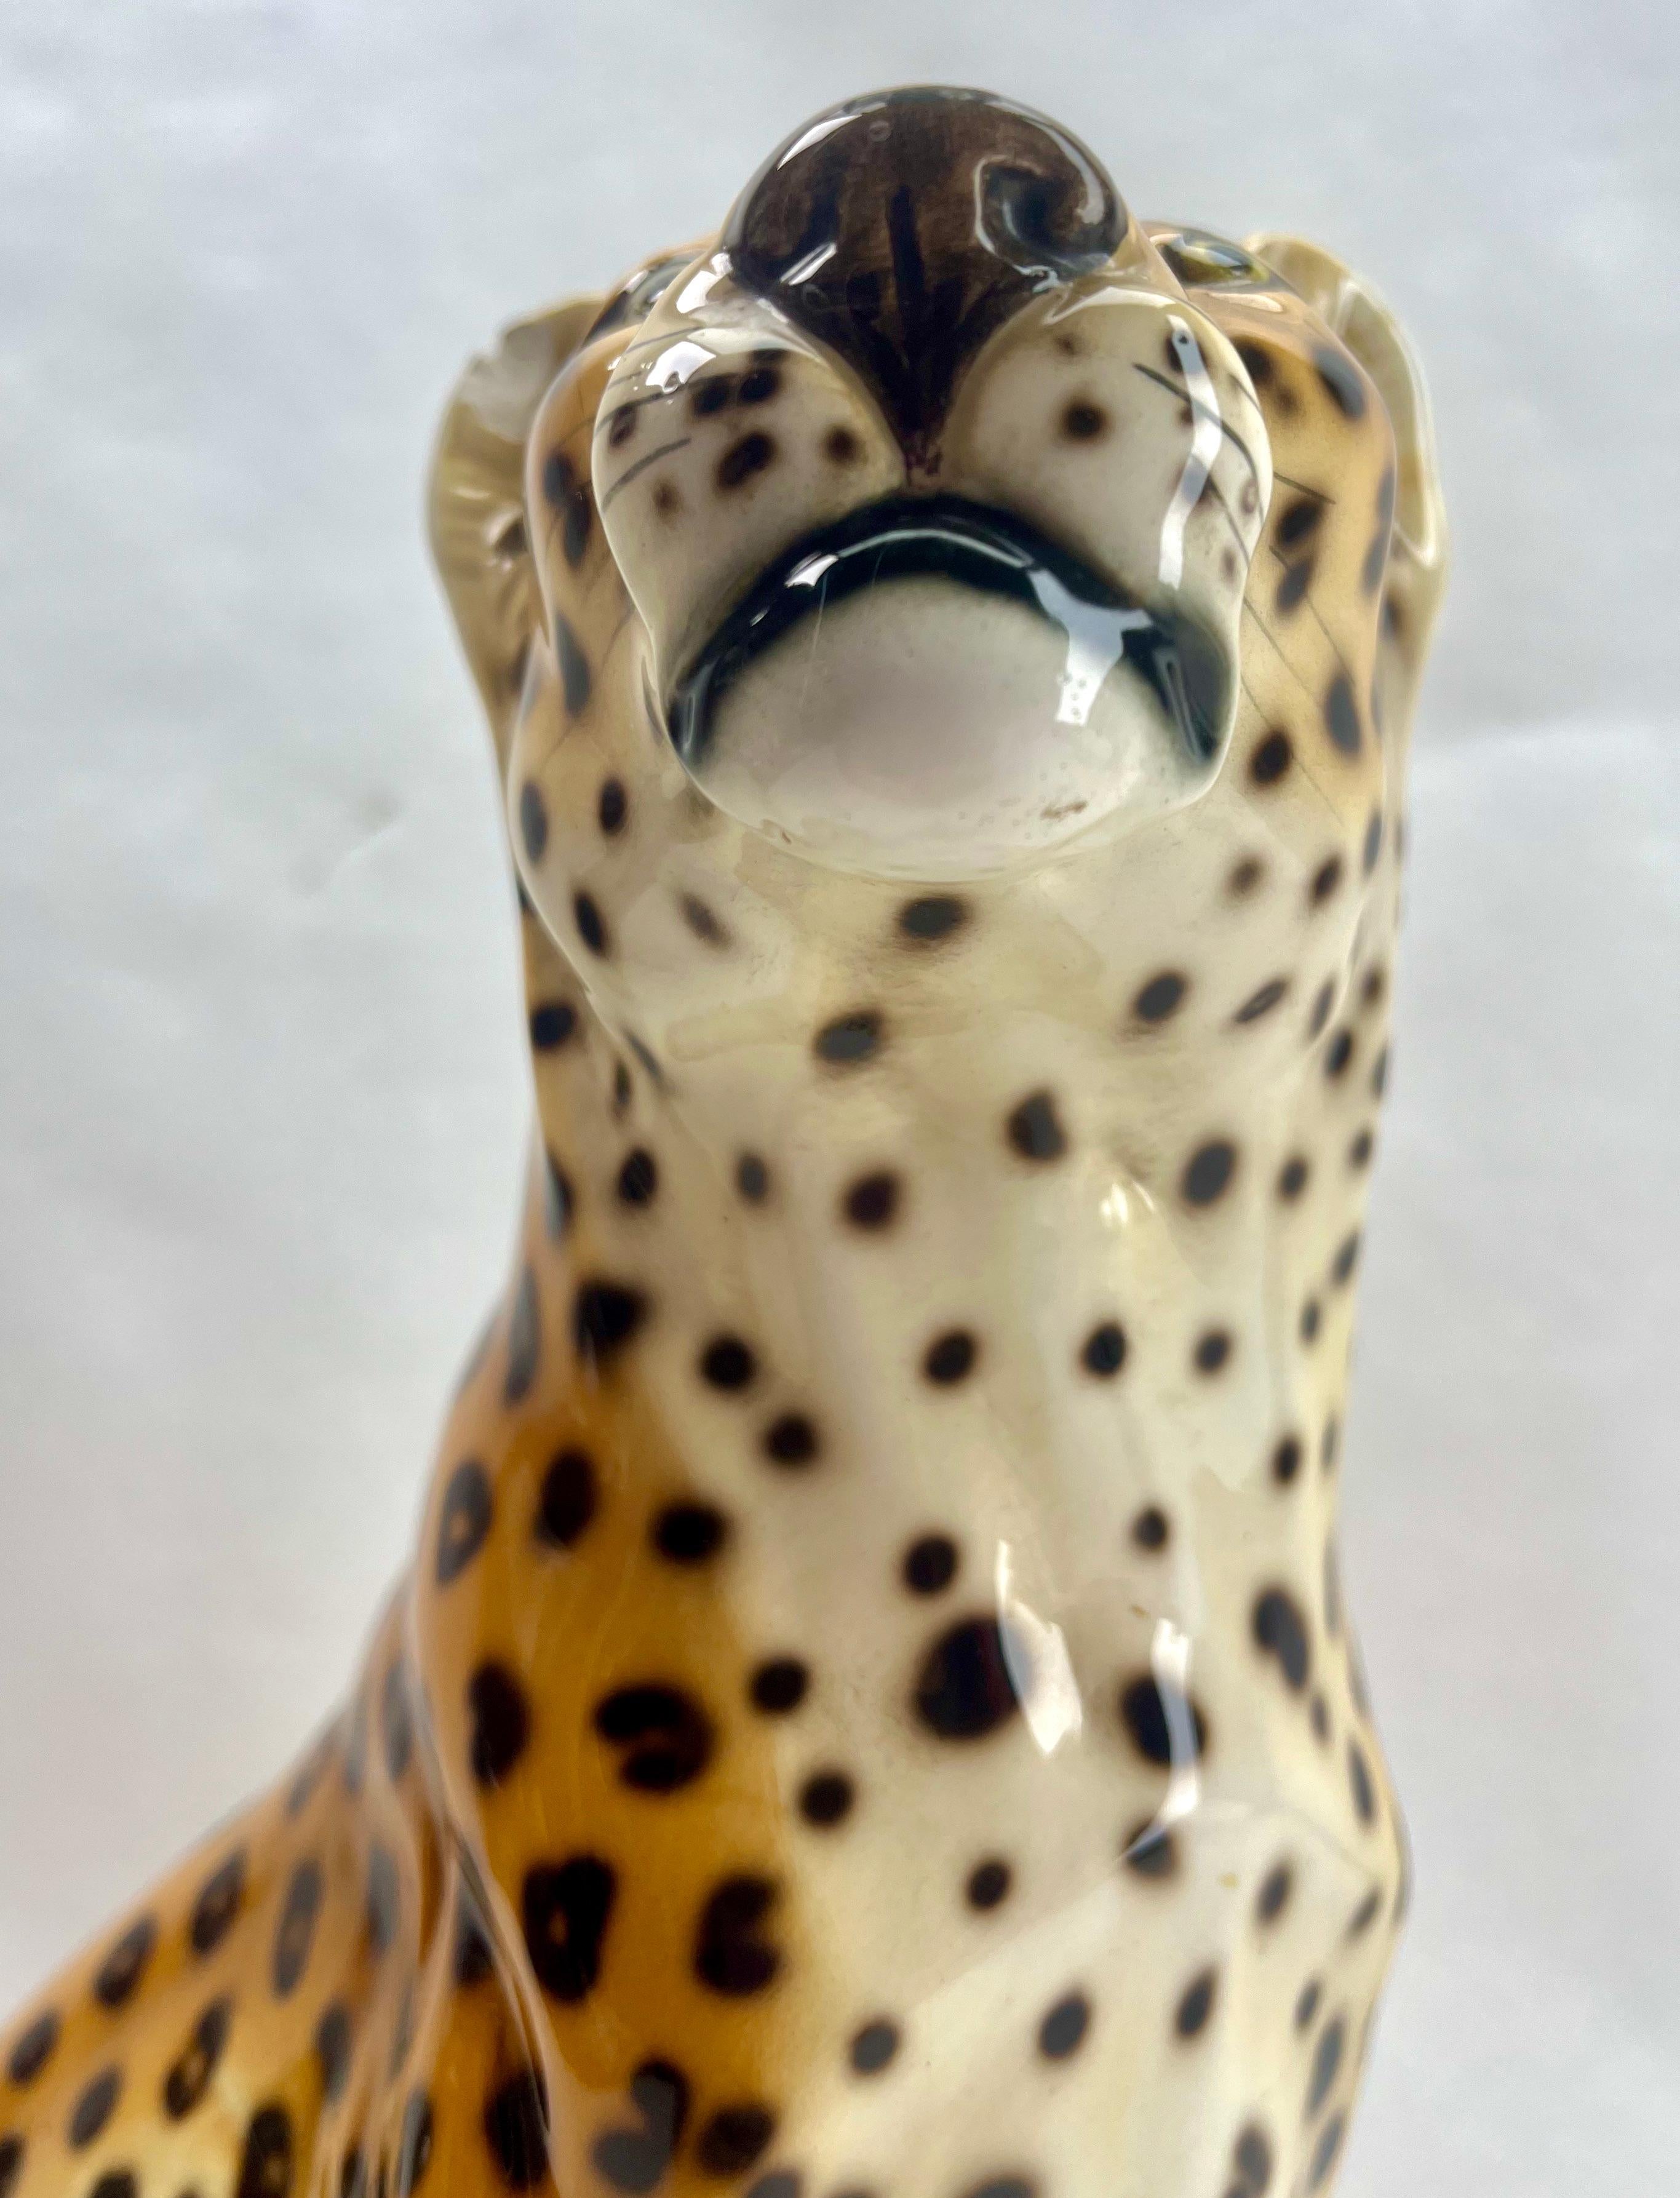 Stylish Ceramic Glazed Handpainted leopard Sculpture Ronzan Signed, Italy, 1950s For Sale 6